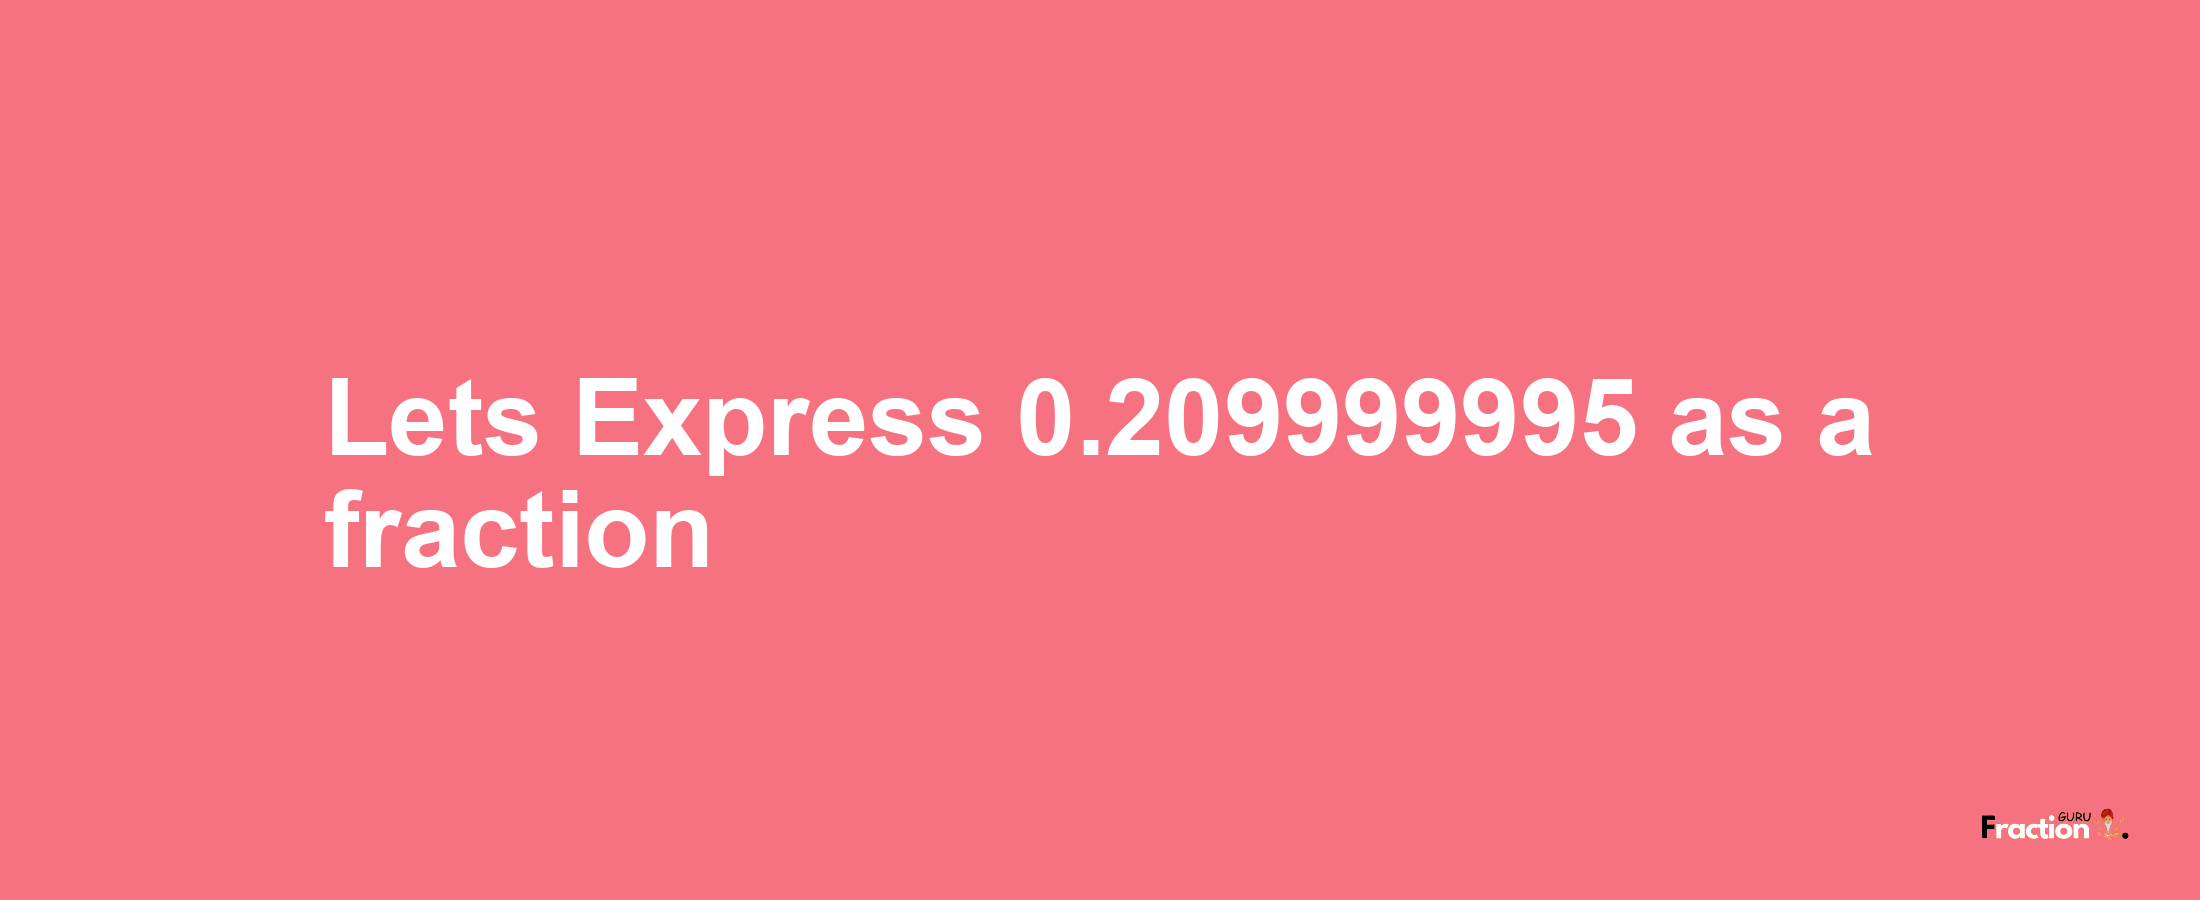 Lets Express 0.209999995 as afraction